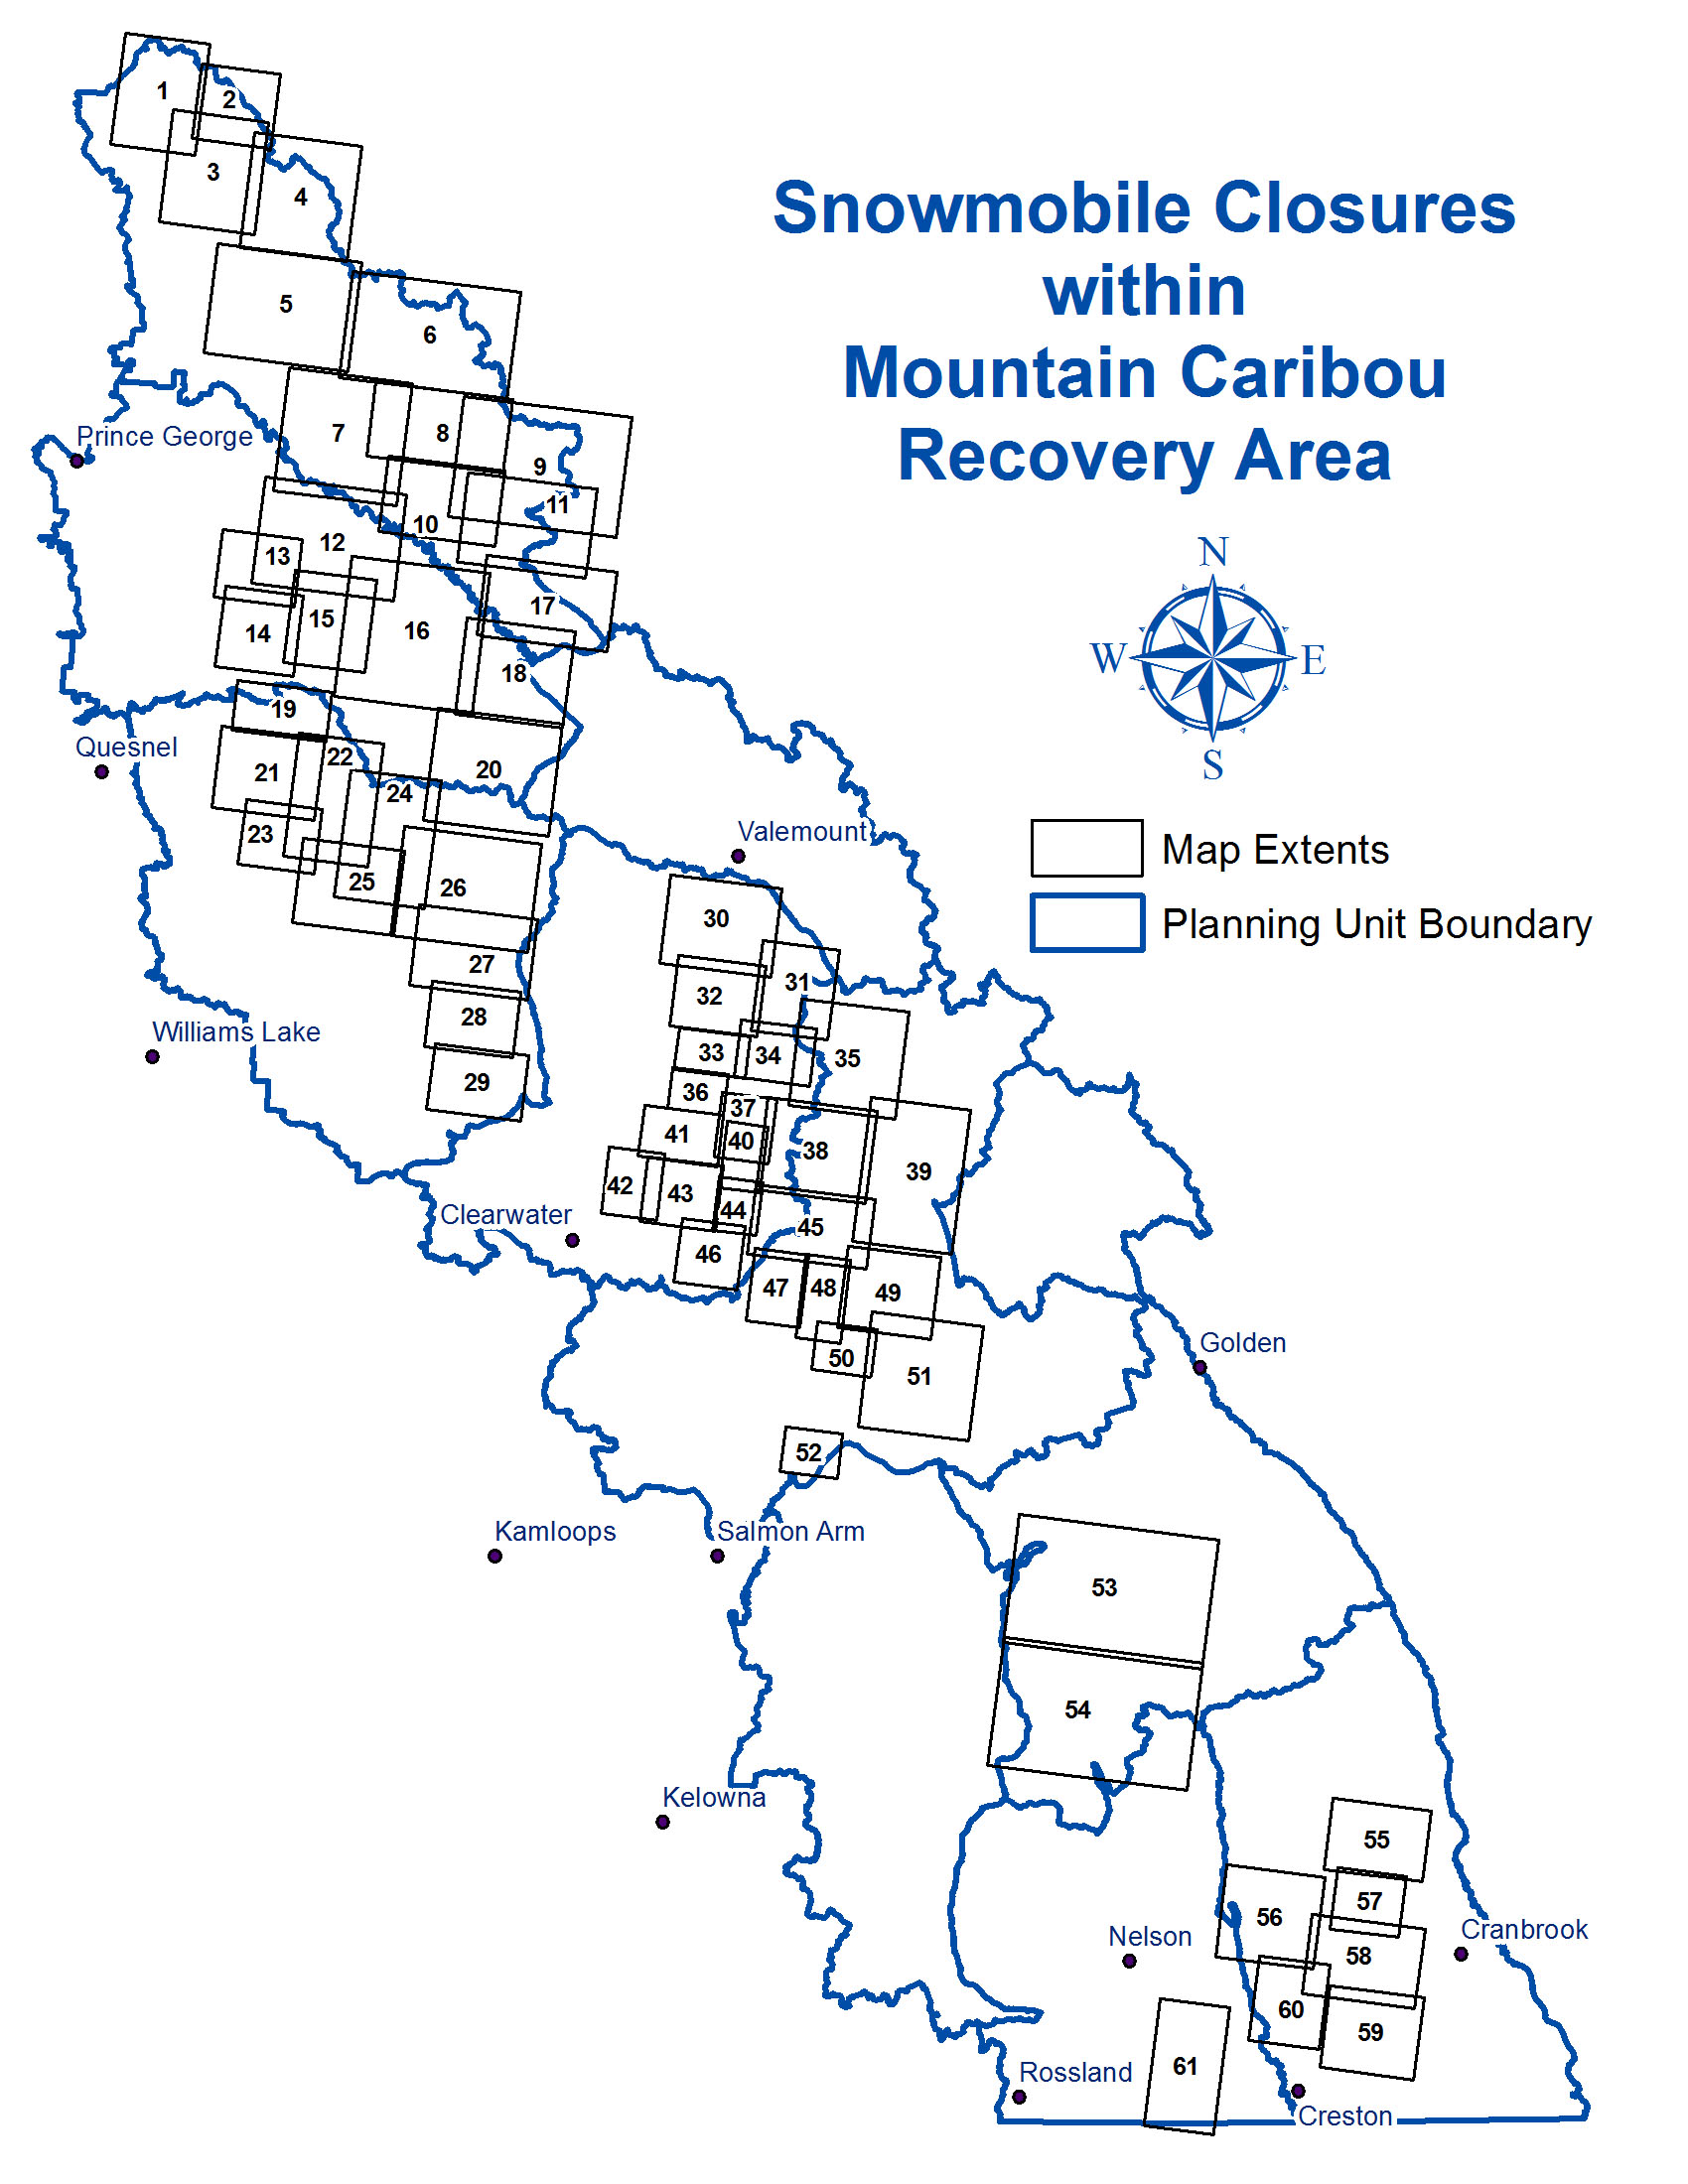 Snowmobile Use within Caribou Recovery Area